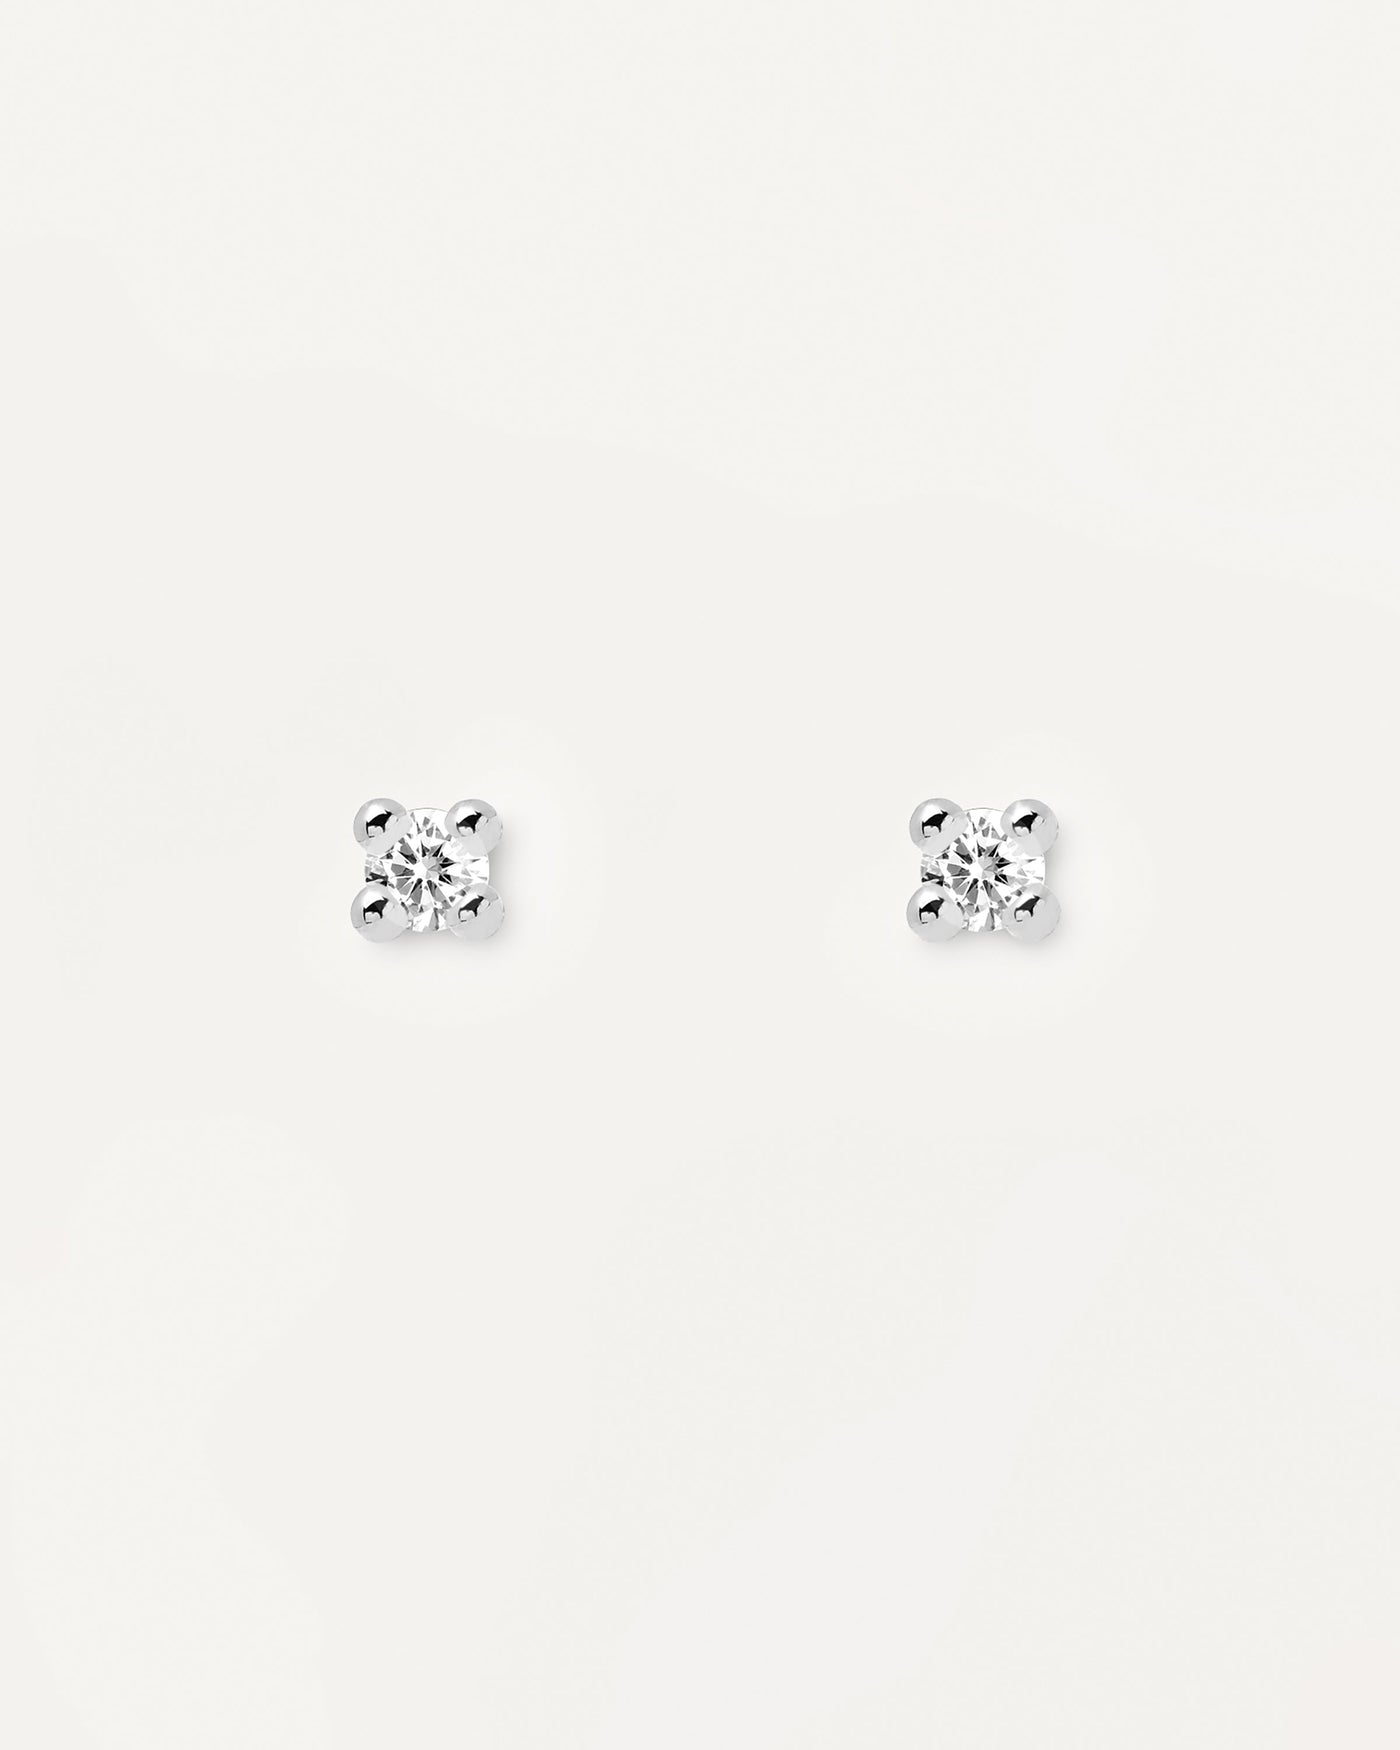 2023 Selection | Essentia Silver Earrings. Pair of 925 sterling silver stud earrings set with a white zirconia stone. Get the latest arrival from PDPAOLA. Place your order safely and get this Best Seller. Free Shipping.